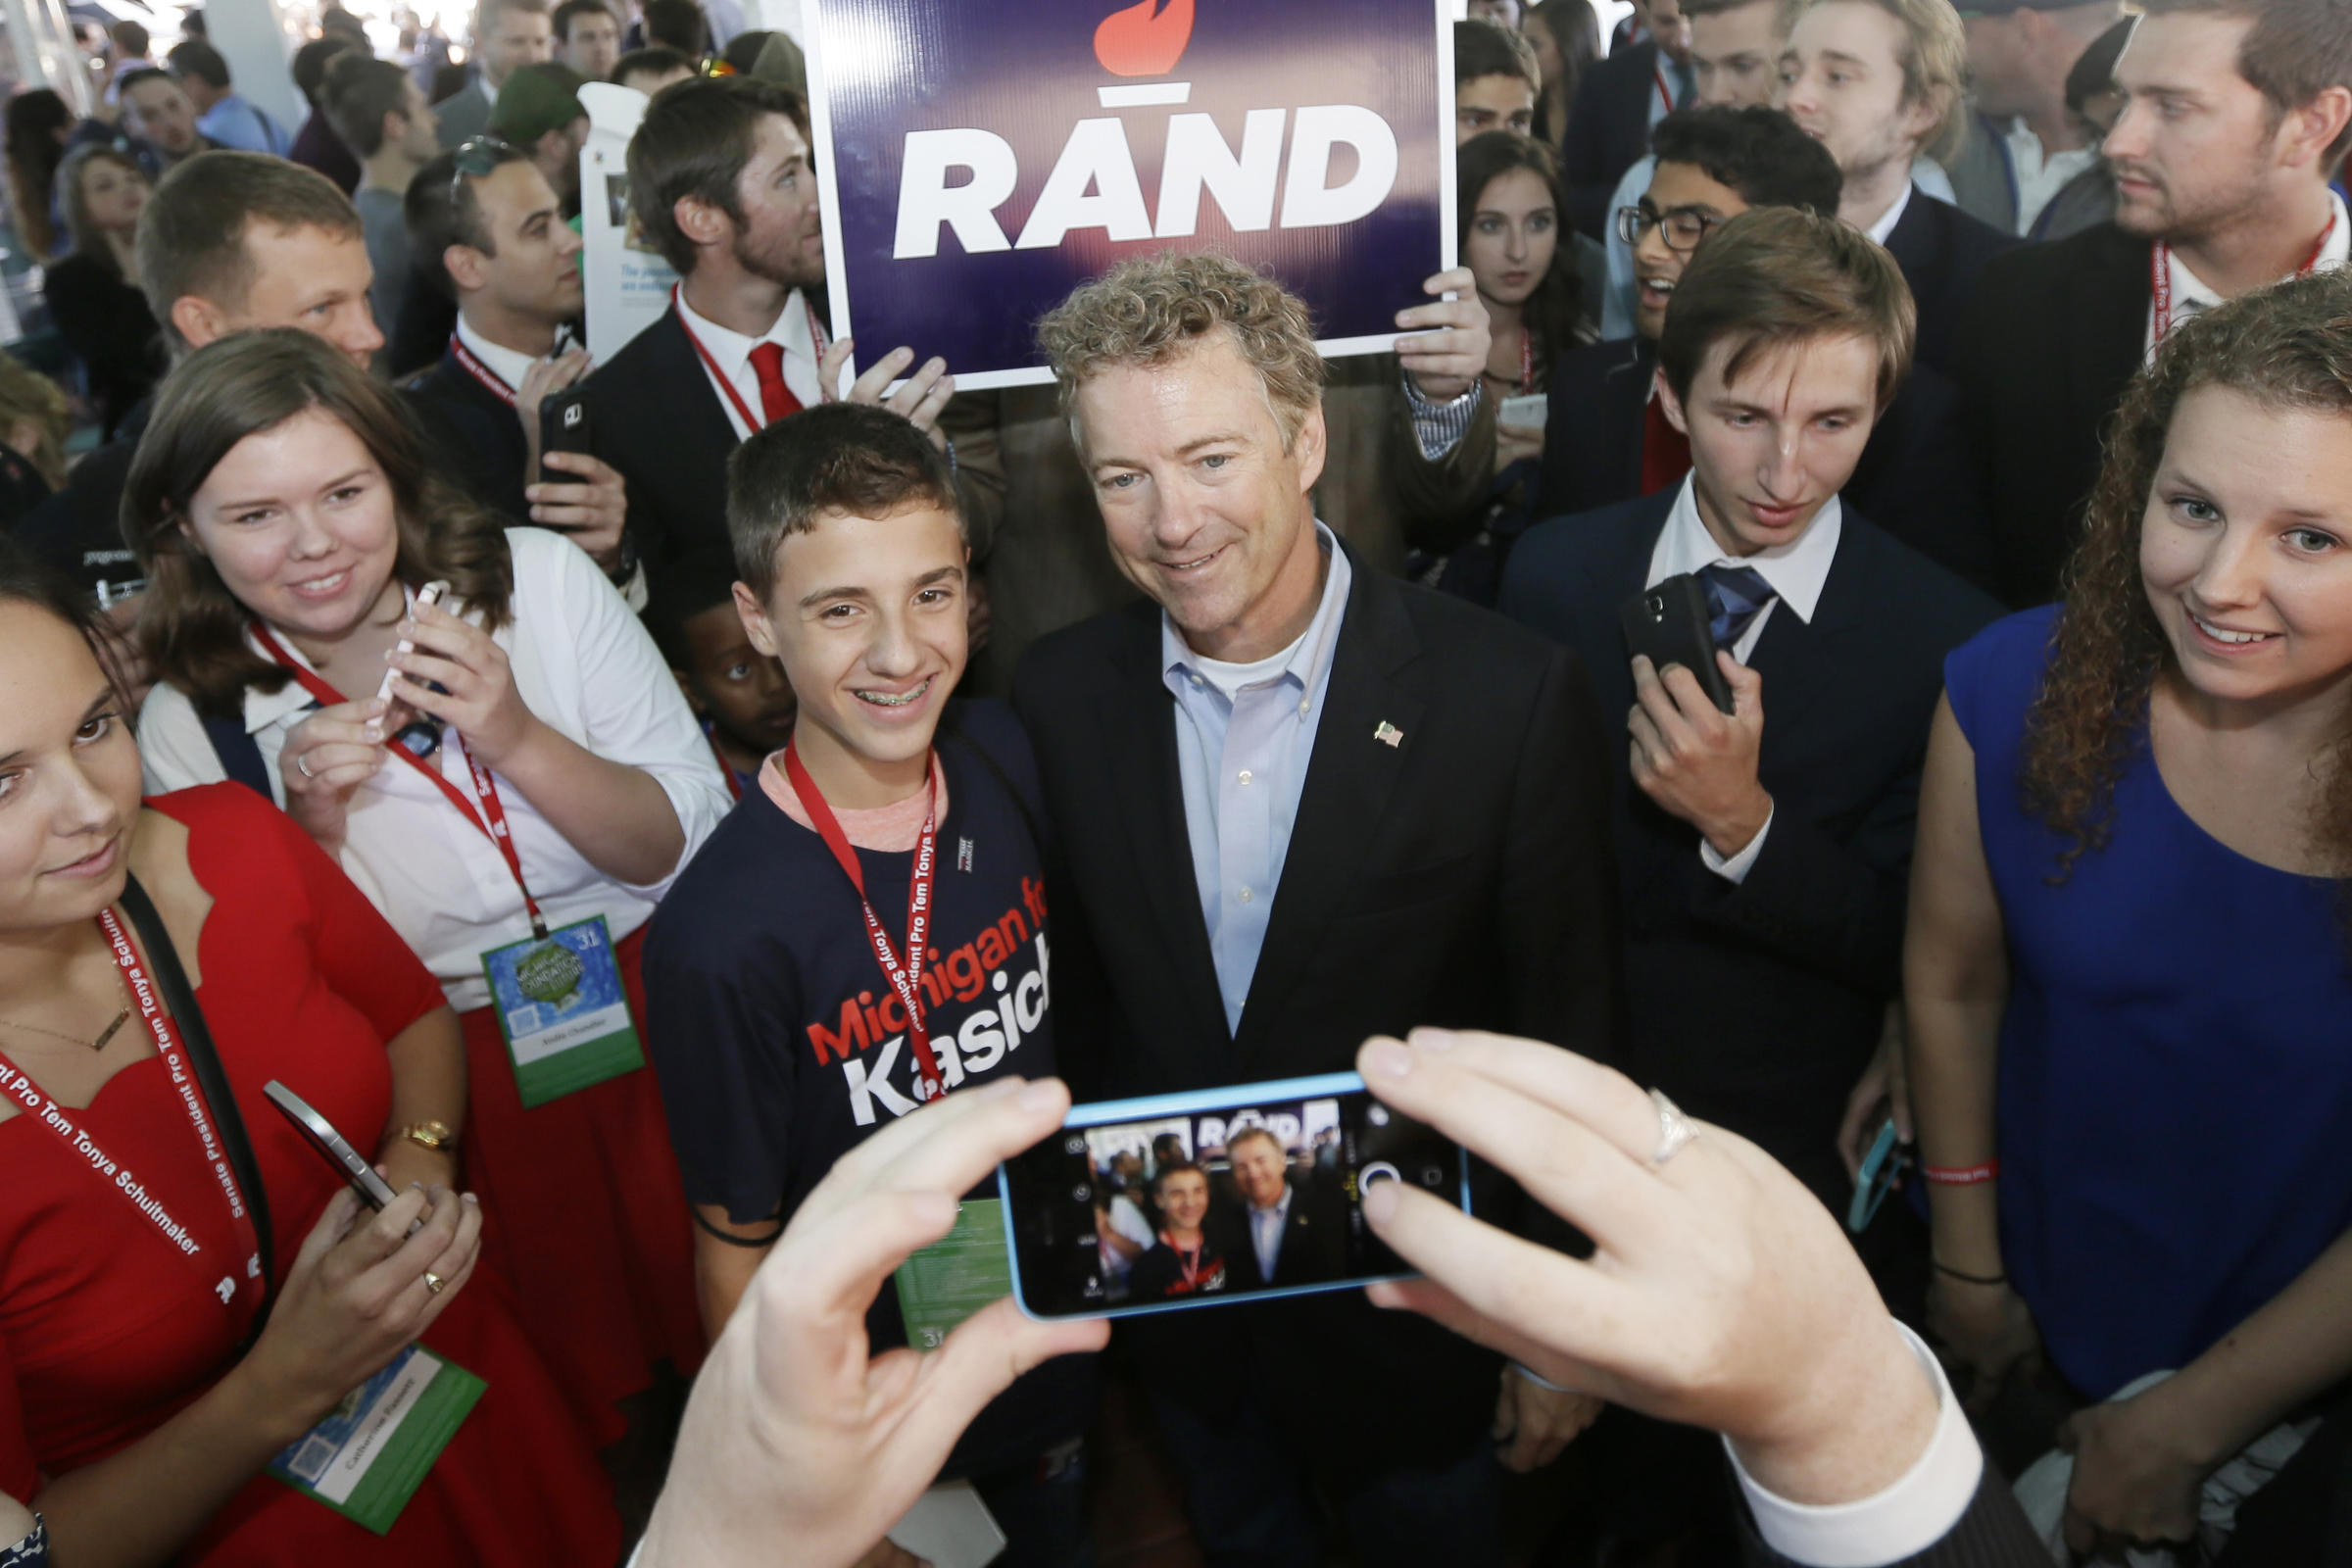 'Dumbass' Or Not, Rand Paul's Live Stream May Be The Future Of Campaigning | KLCC